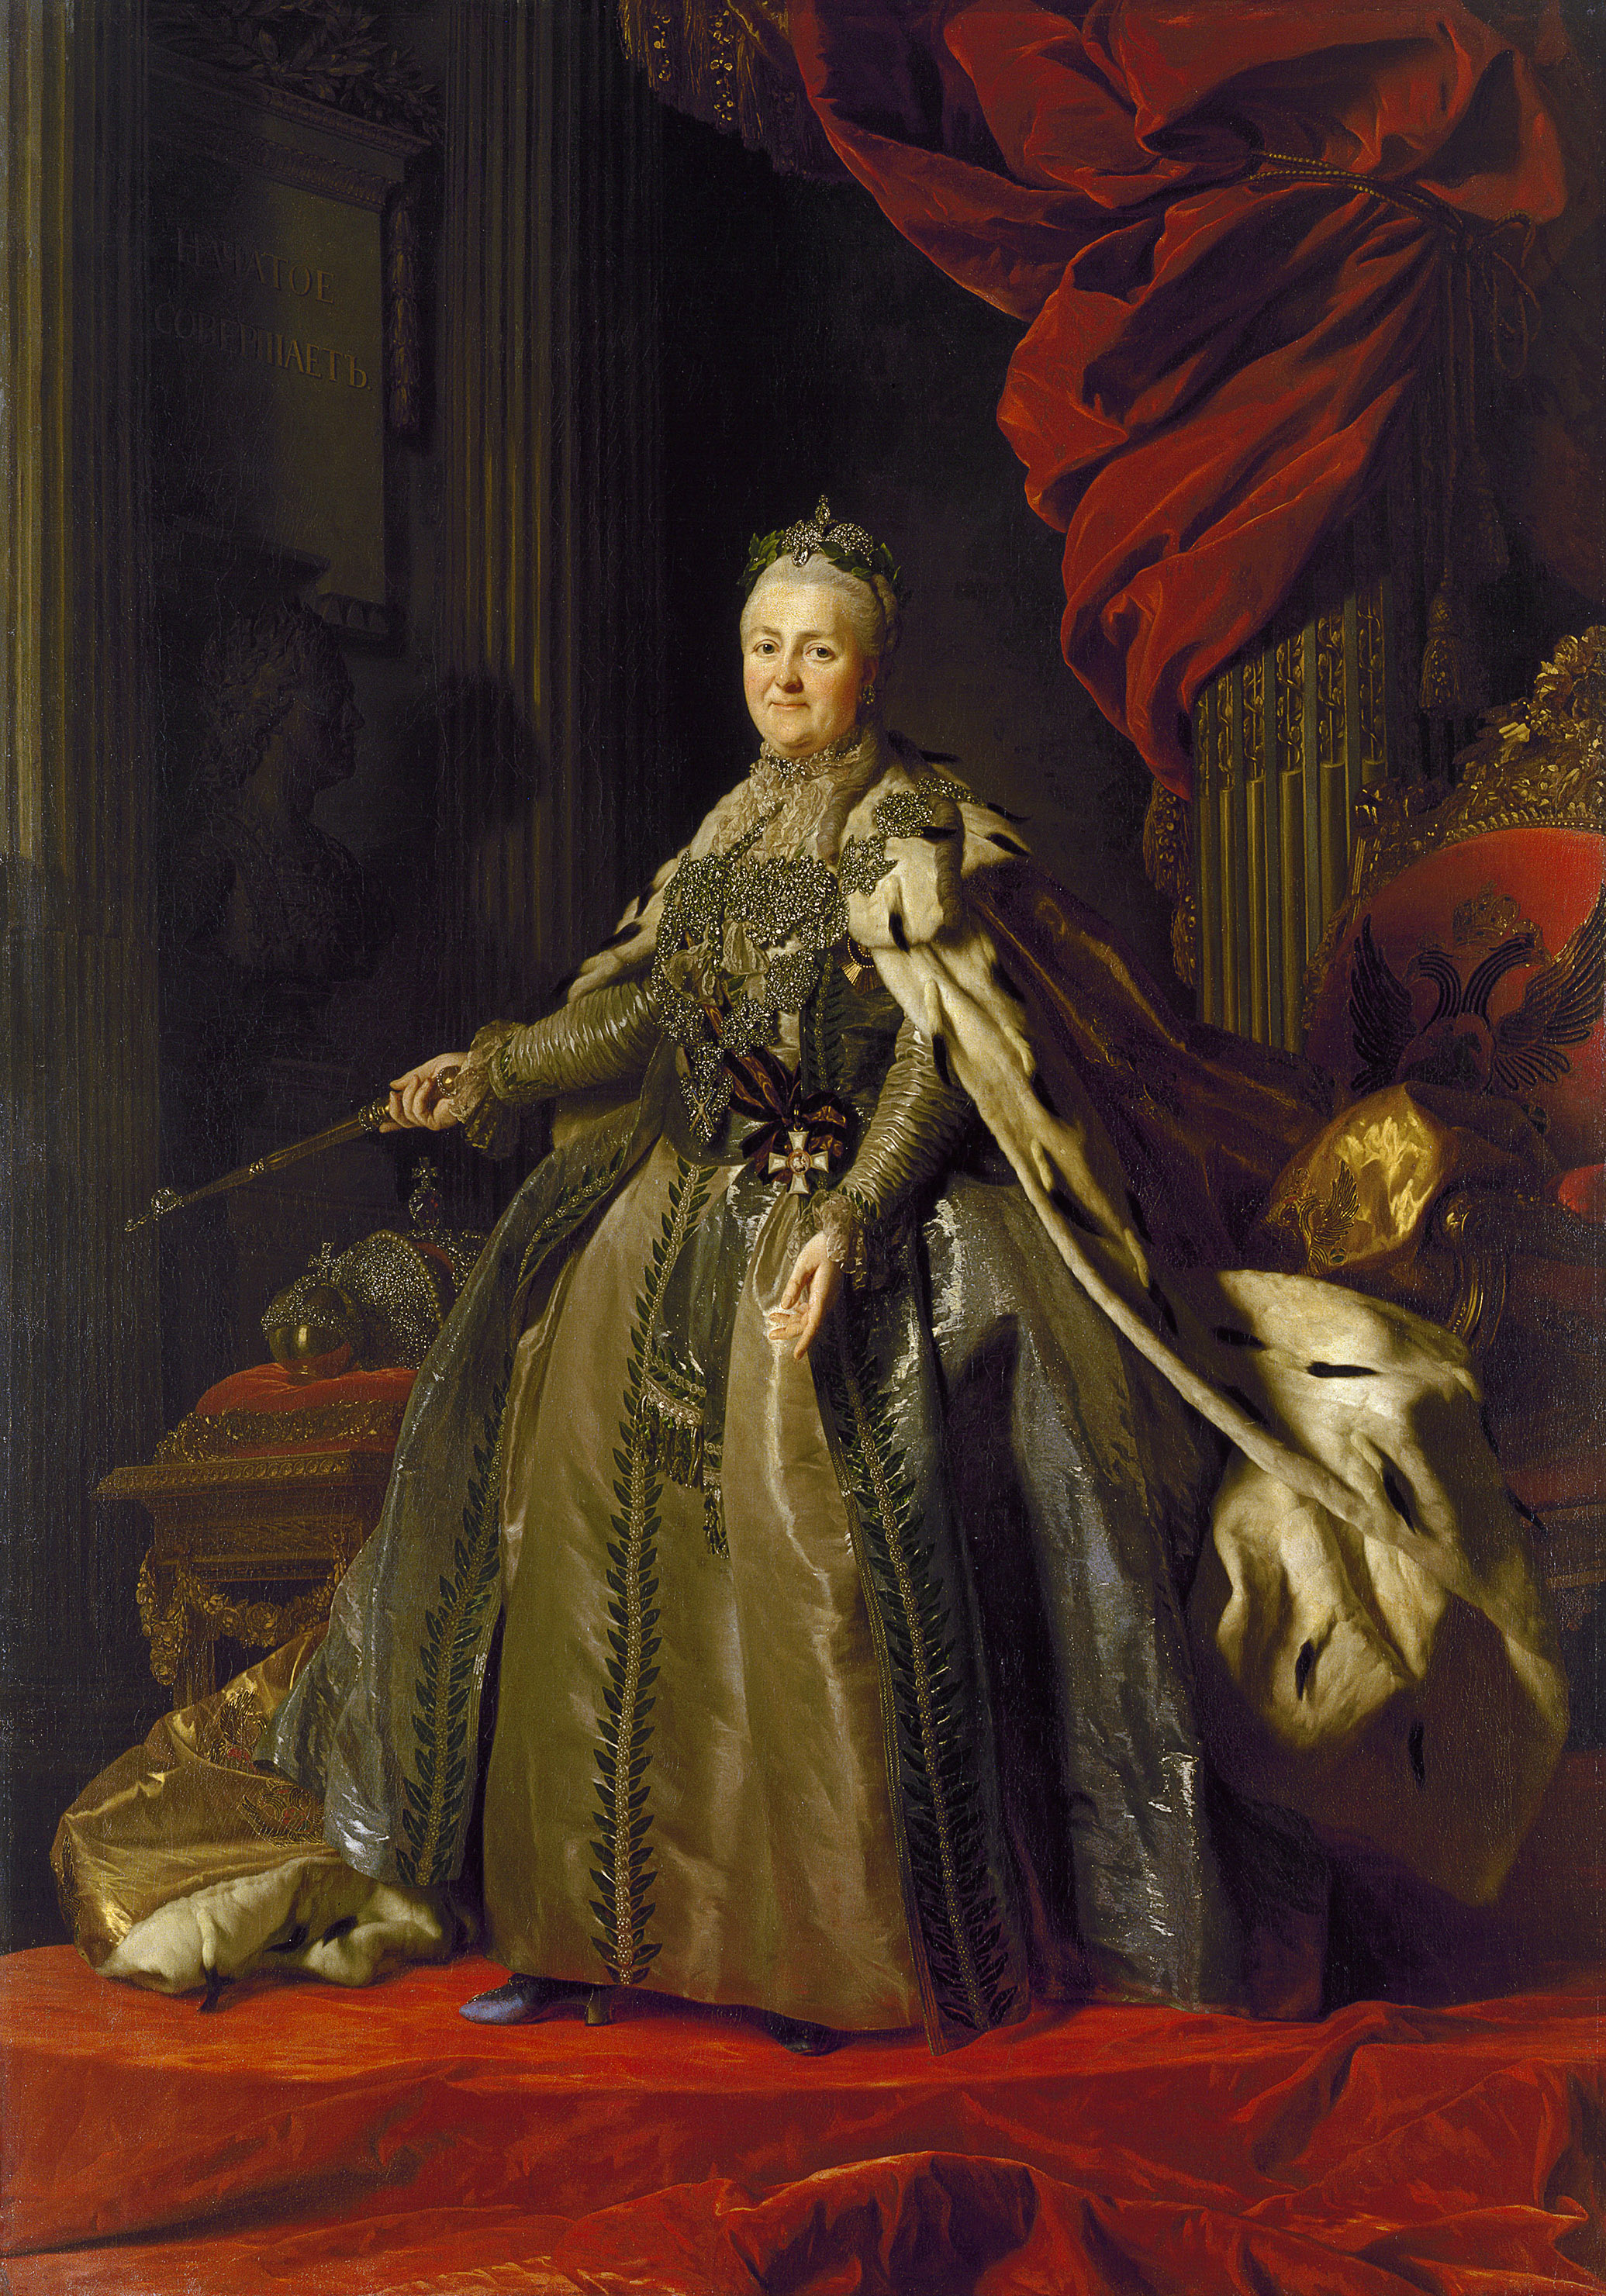 Alexander ROSLIN, (Swedish 1718–93), Portrait of Catherine II 1776–77. oil on canvas, 271.0 х 189.5 cm, The State Hermitage Museum, St Petersburg (Inv. no. ГЭ-1316), Acquired from the artist, 1777